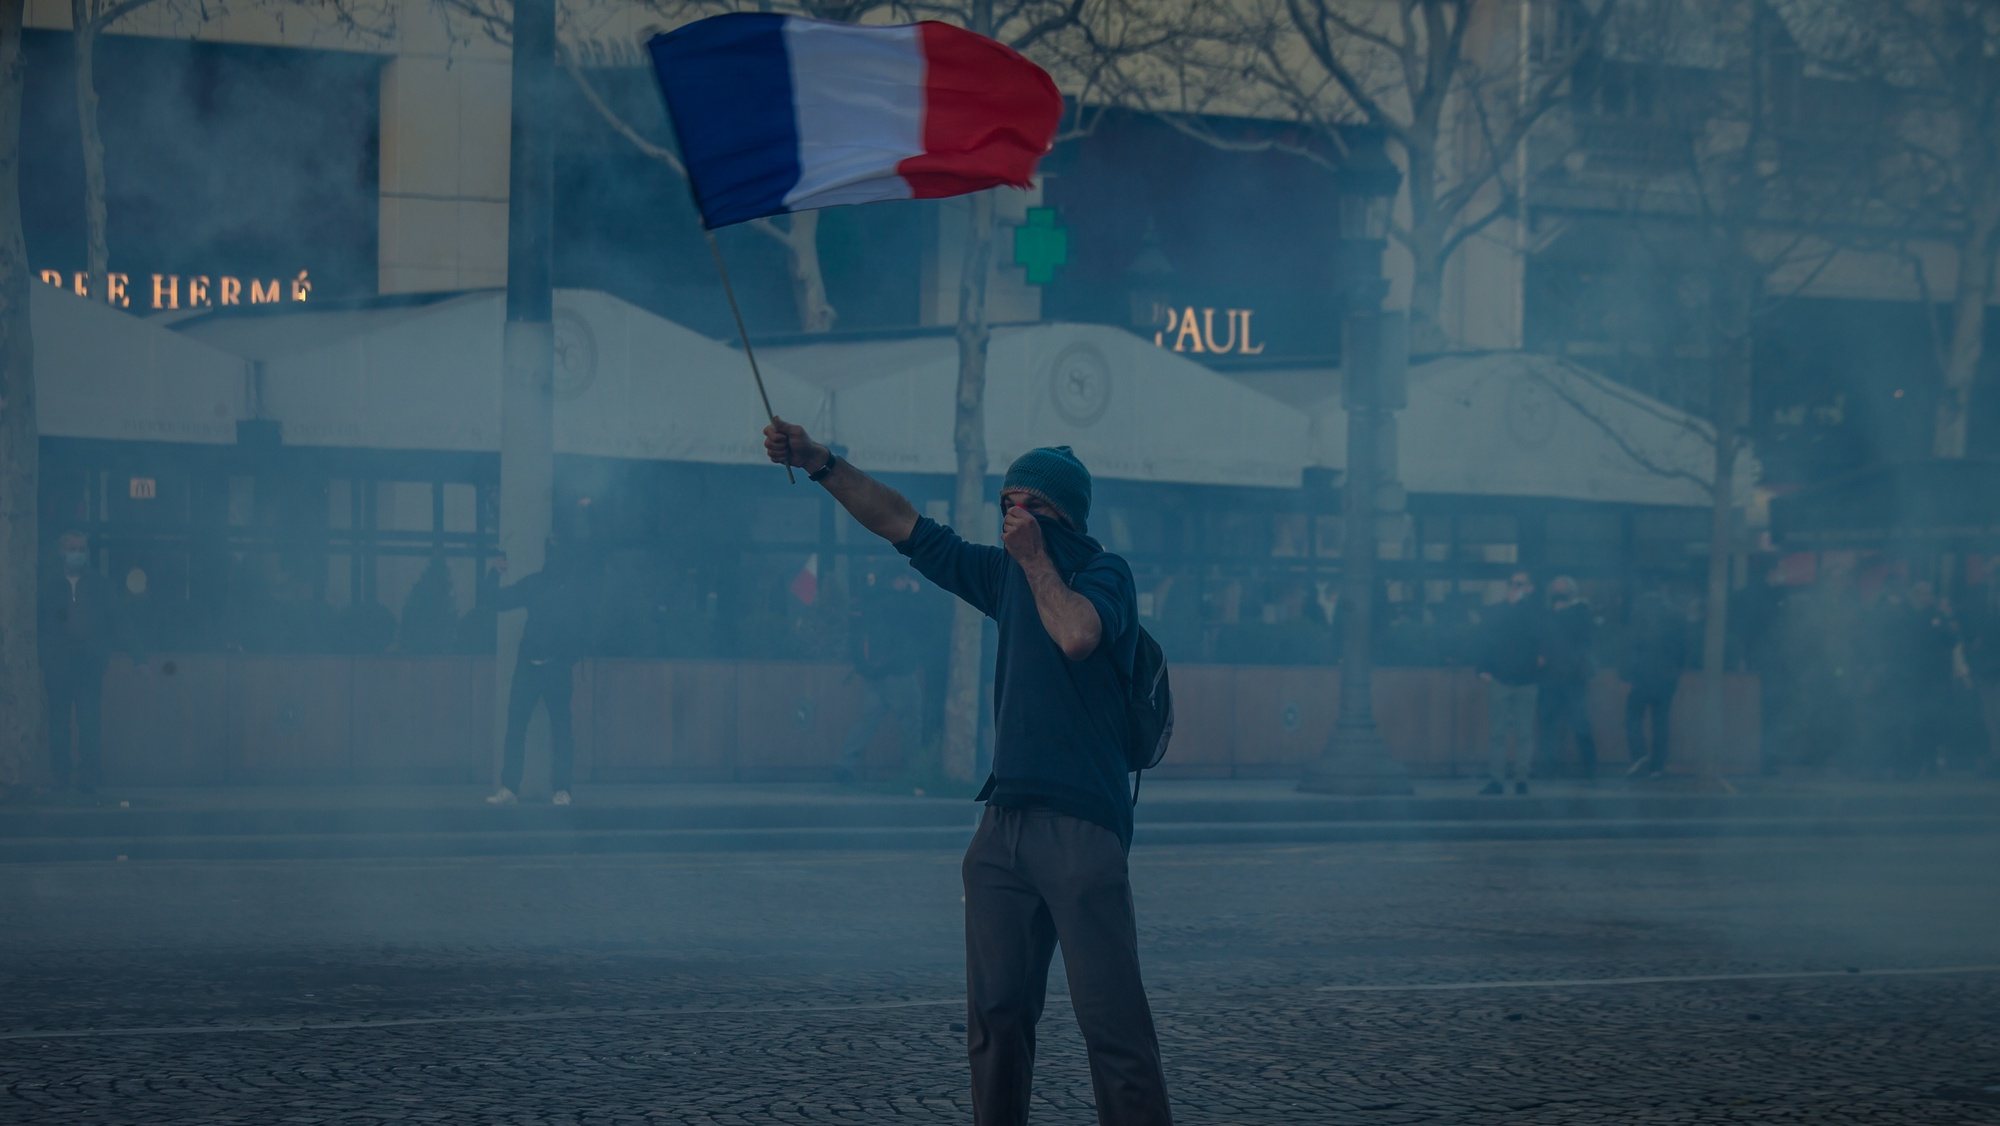 epa09750518 A protester waves a French flag as the so-called &#039;Freedom Convoy&#039; members are trying to block the traffic, in Paris, France, 12 February 2022. Paris police have prohibited the convoy, as announced by the capital&#039;s prefect on 10 February. A series of convoy demonstrations has been taking place in France to call for the lifting of all Covid-19-related restrictions and mandates, in light of the ongoing protest in Canada, where truck drivers have been rallying against the government-imposed mandatory Covid-19 vaccine to enter the country.  EPA/CHRISTOPHE PETIT TESSON